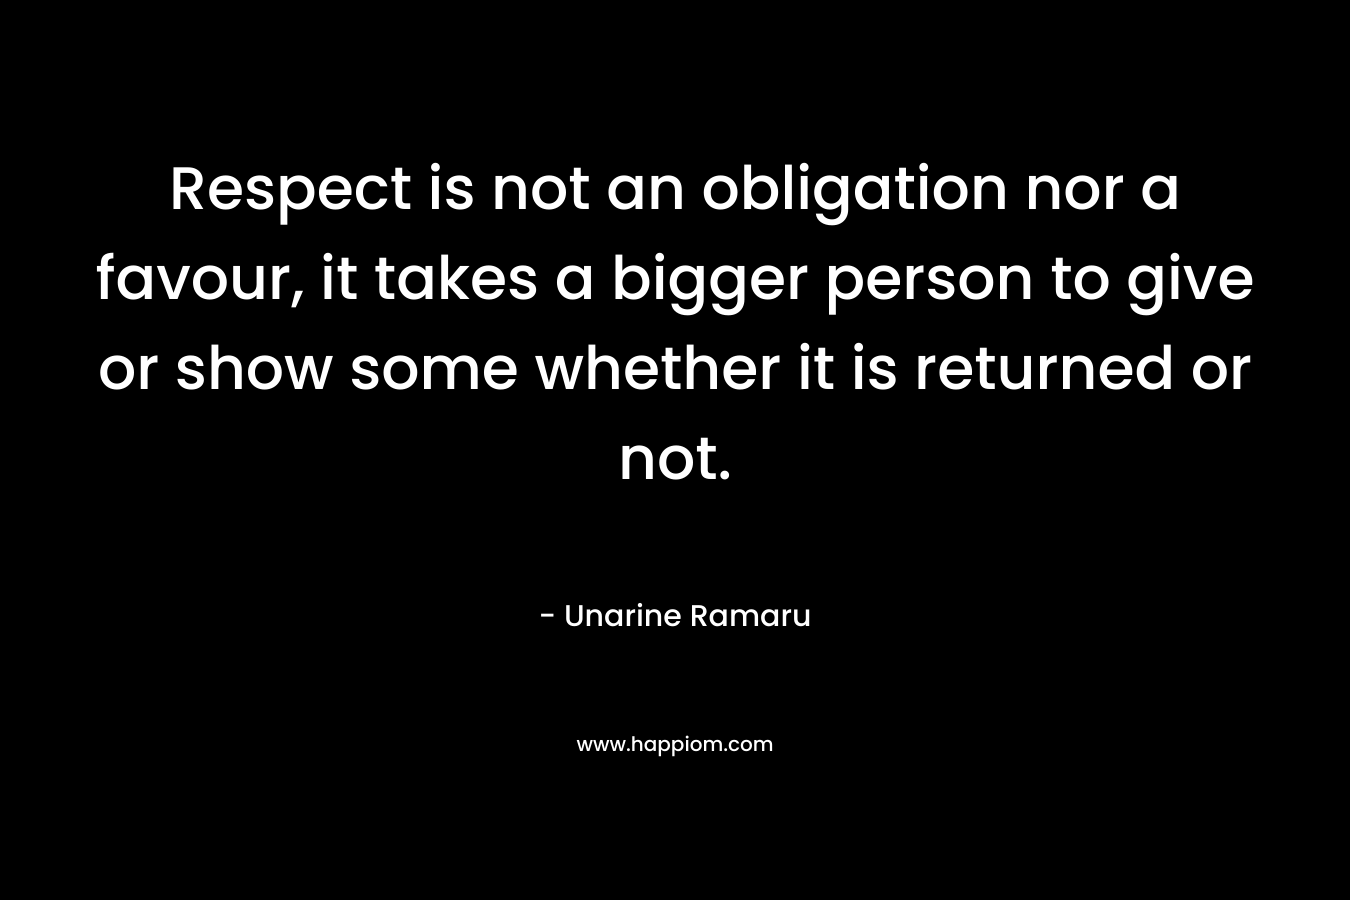 Respect is not an obligation nor a favour, it takes a bigger person to give or show some whether it is returned or not.